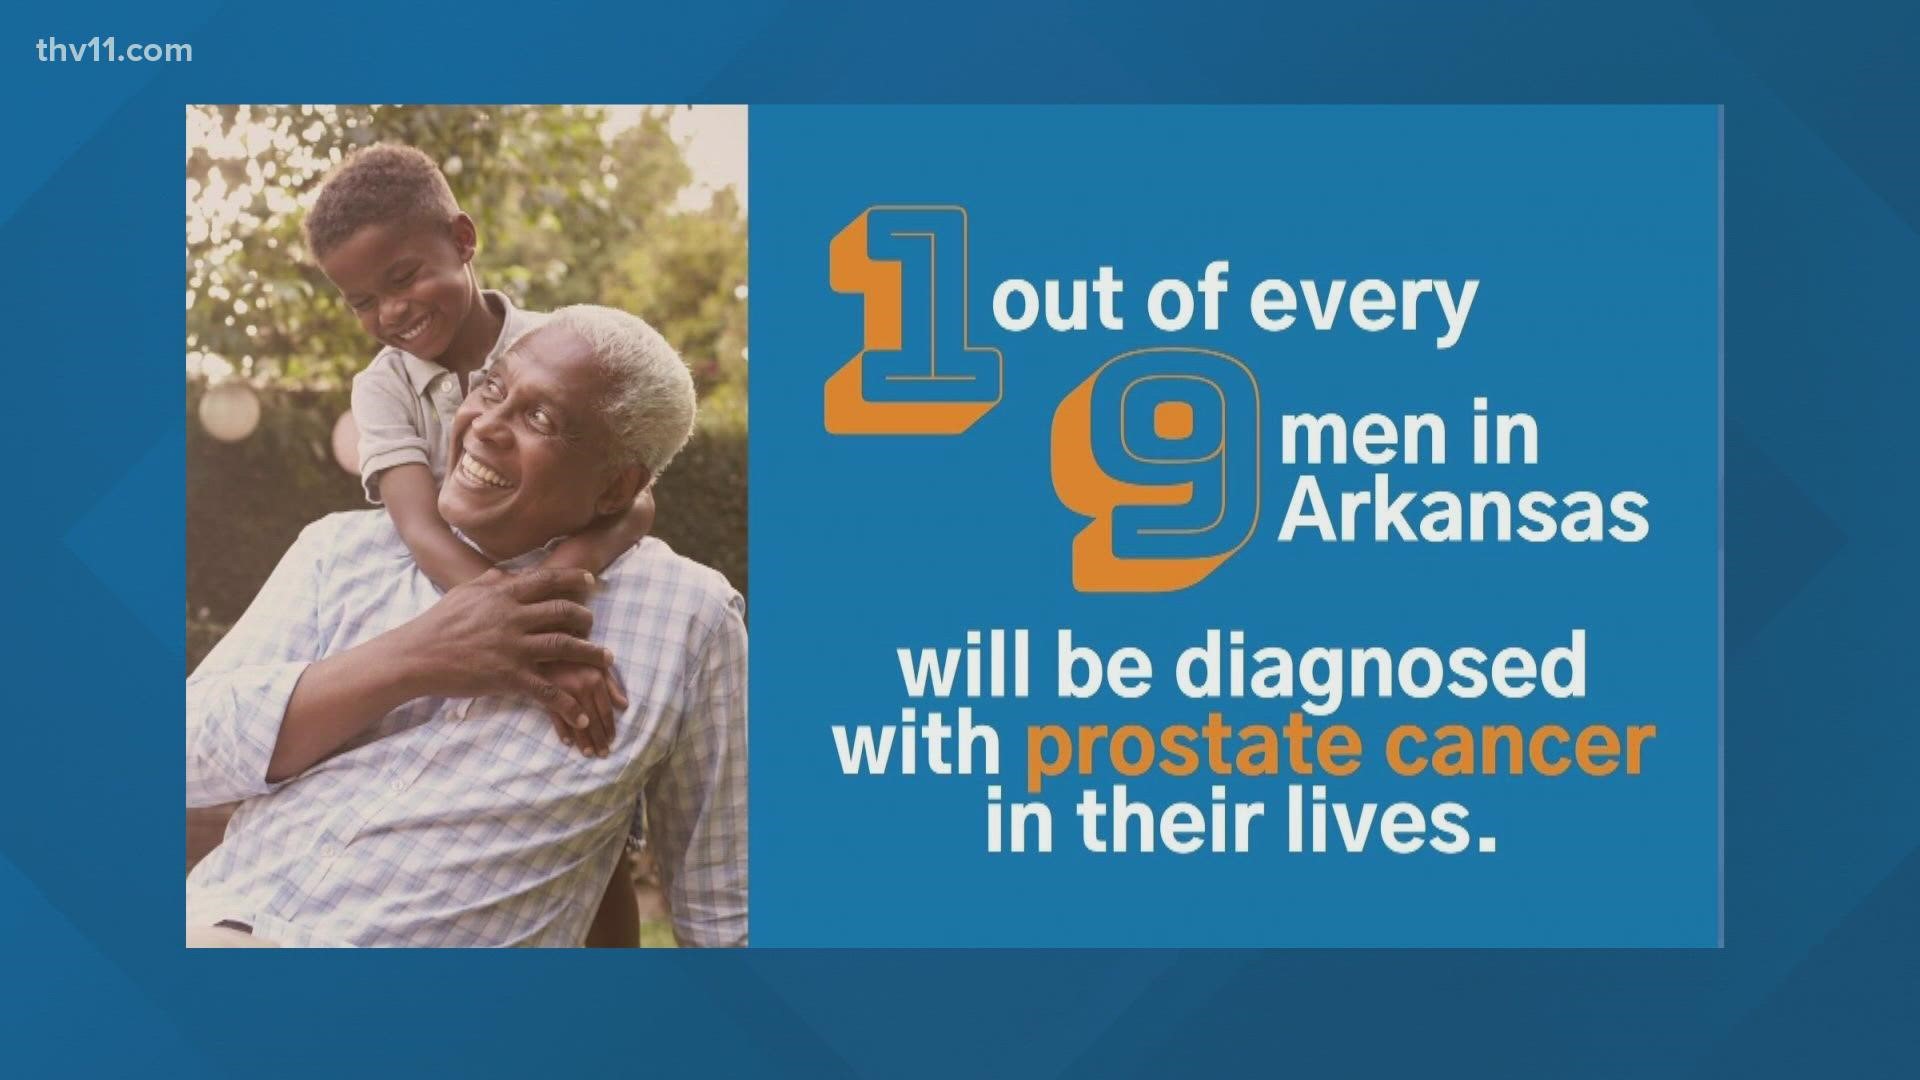 Prostate cancer is the most common cancer affecting men and the second leading cause of cancer deaths.